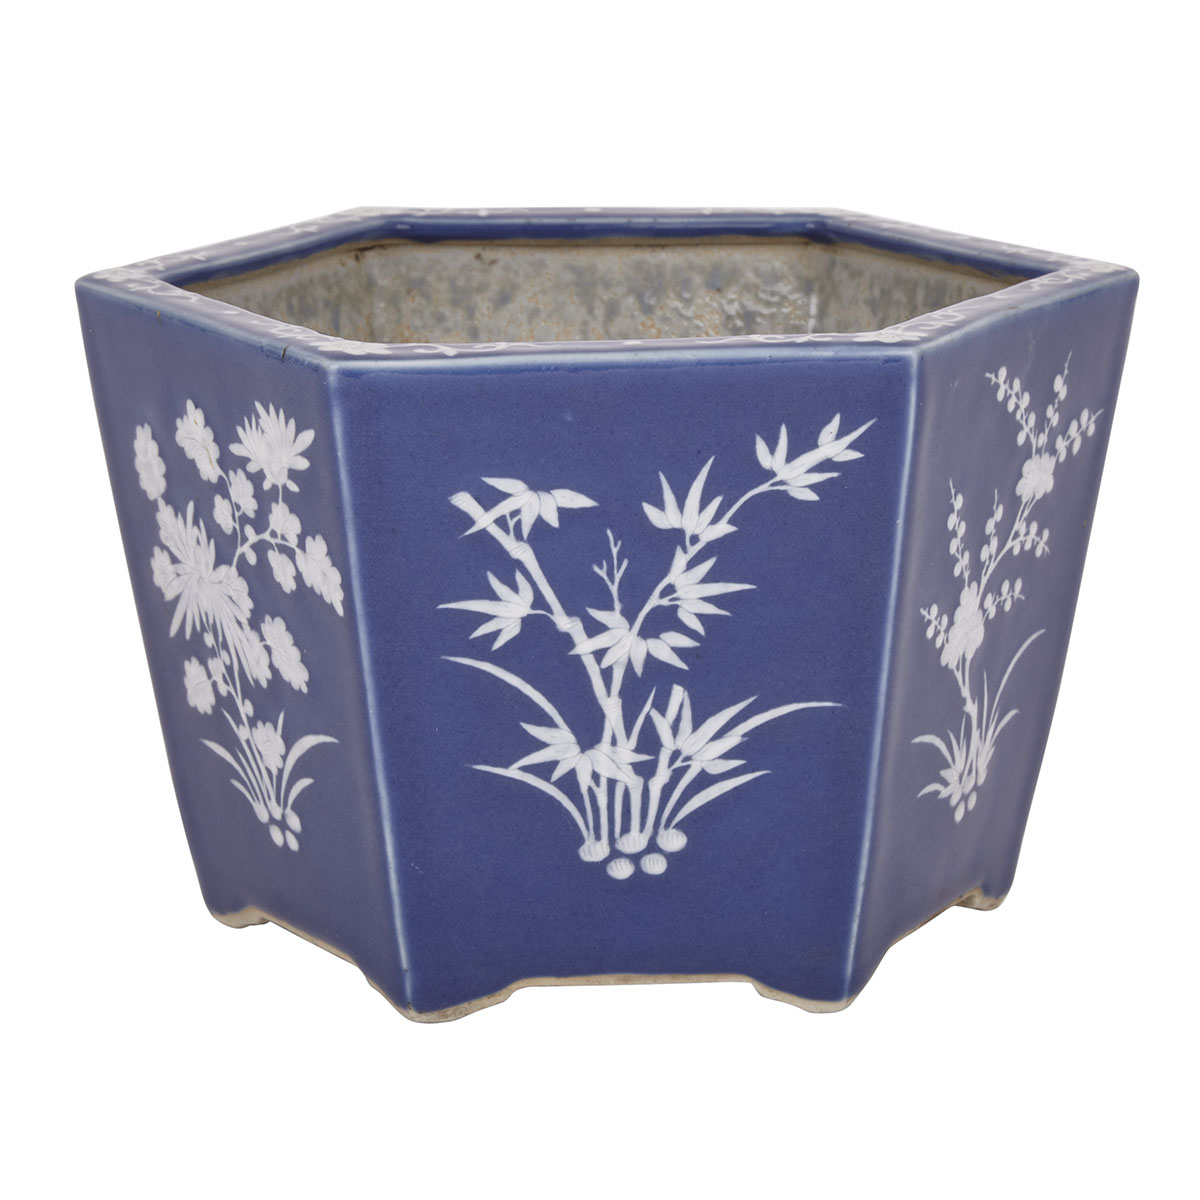 A Chinese Blue-Ground and White- Slip Decorated Planter, Republic Period (1911-1949)